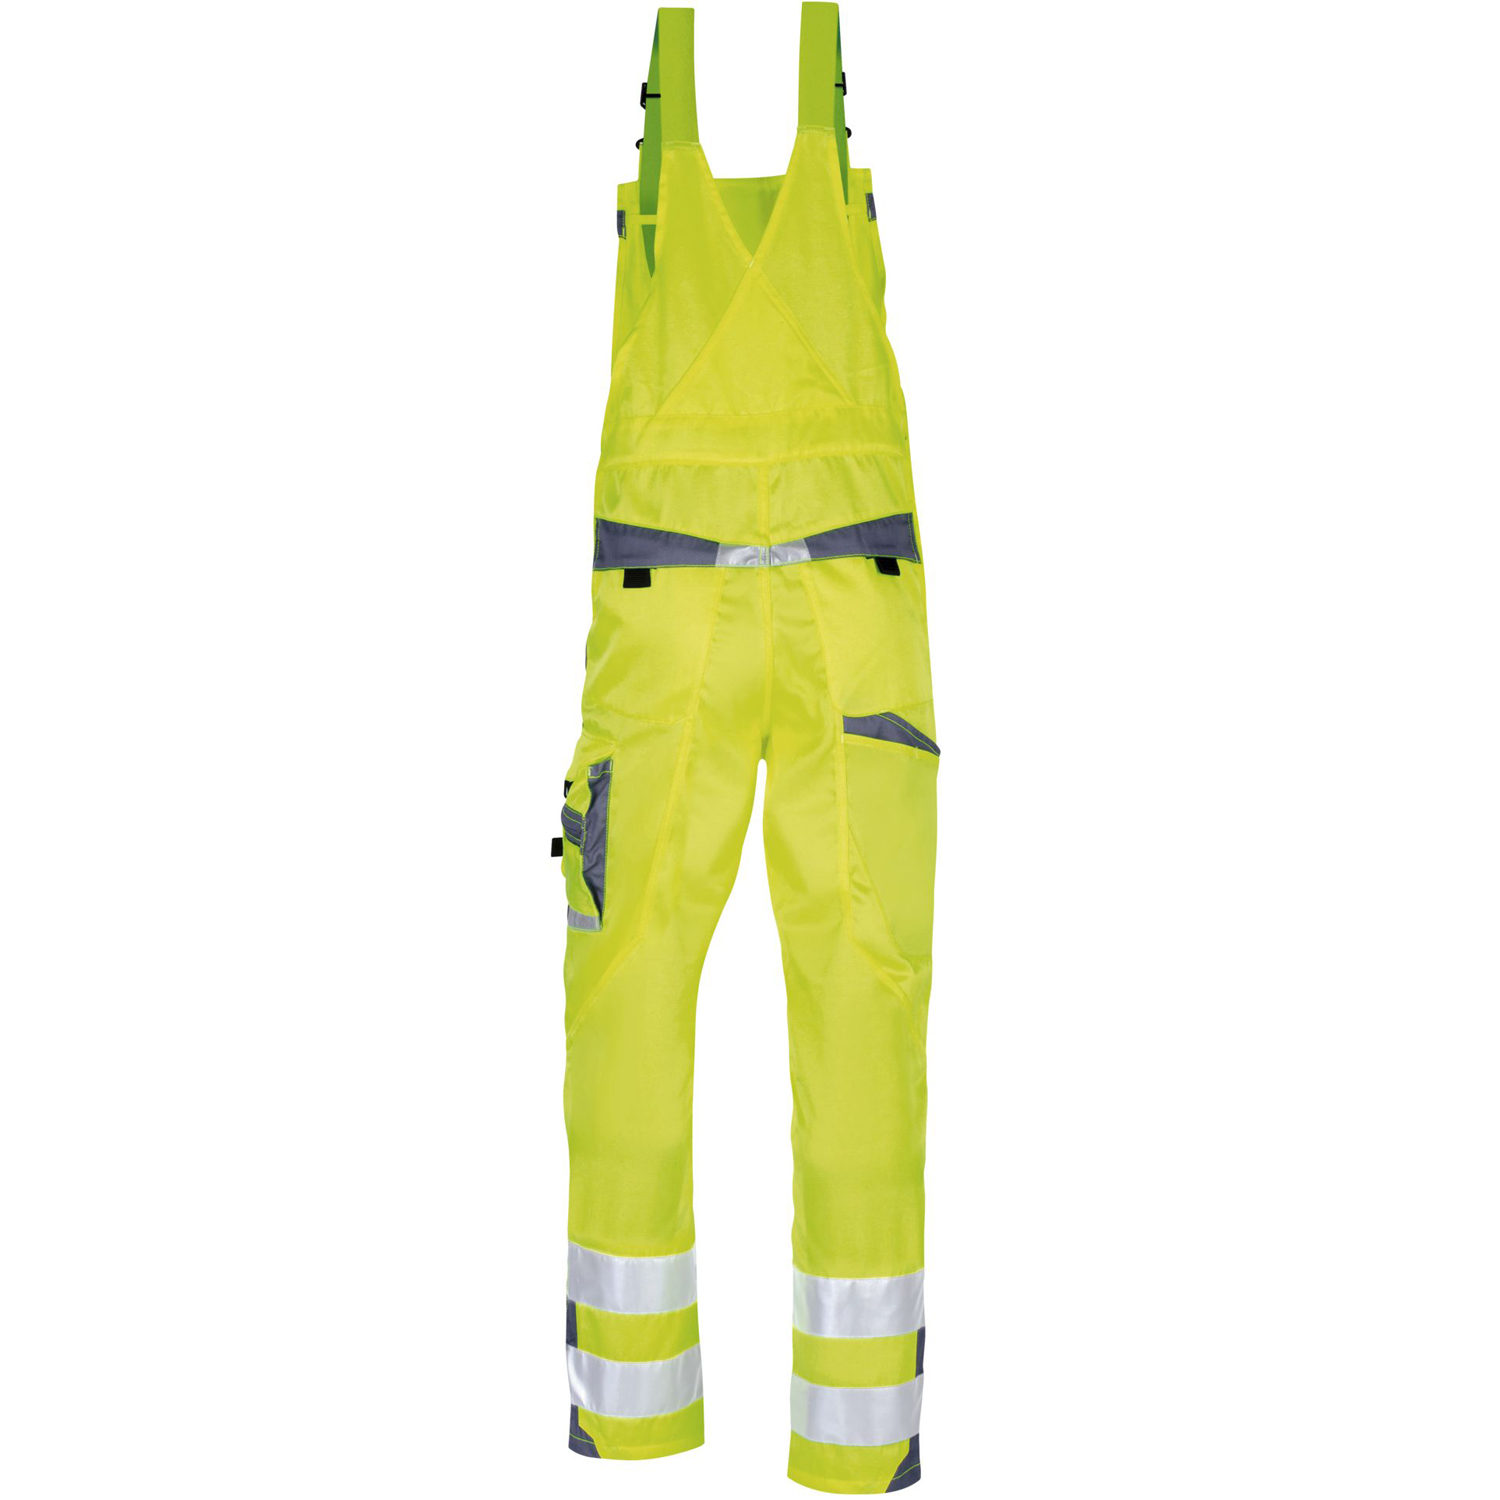 Work overalls in yellow by PKA Klöcker in large sizes 58-66